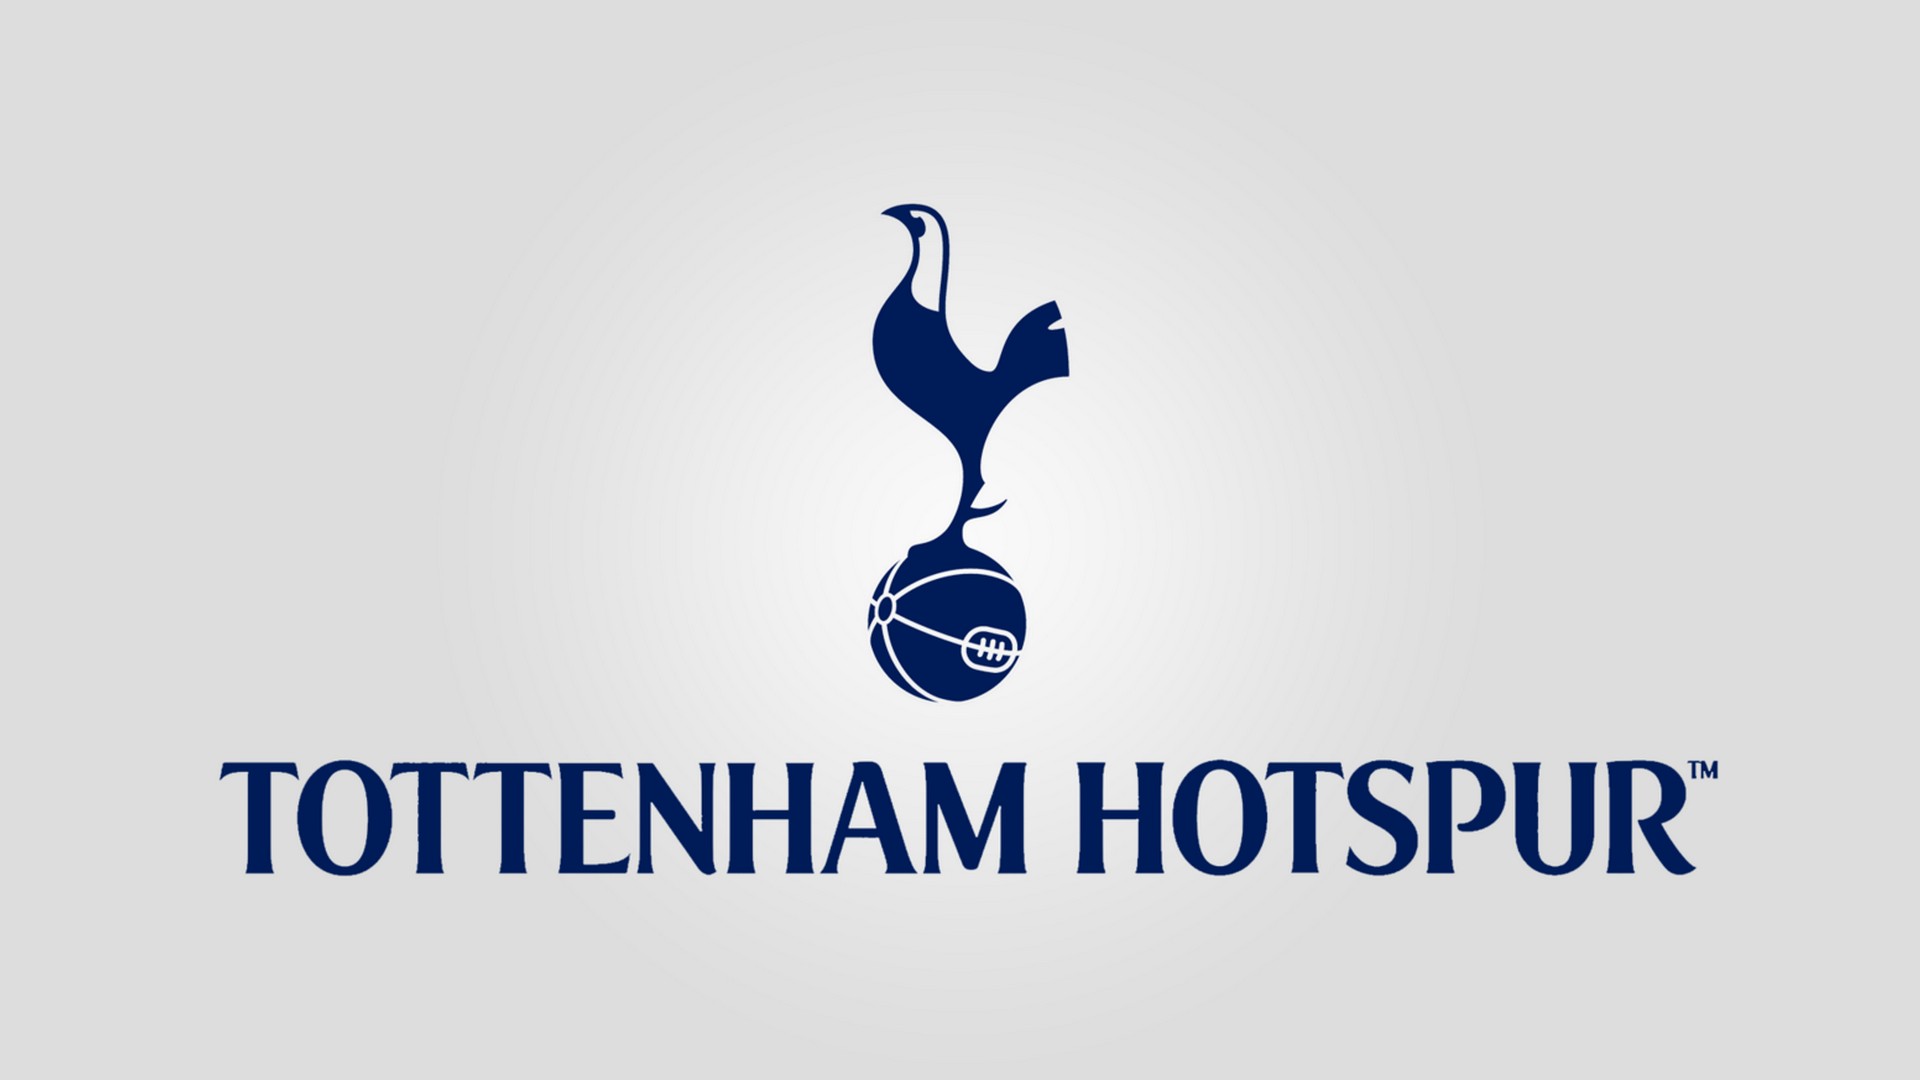 HD Backgrounds Tottenham Hotspur with high-resolution 1920x1080 pixel. You can use this wallpaper for your Desktop Computers, Mac Screensavers, Windows Backgrounds, iPhone Wallpapers, Tablet or Android Lock screen and another Mobile device